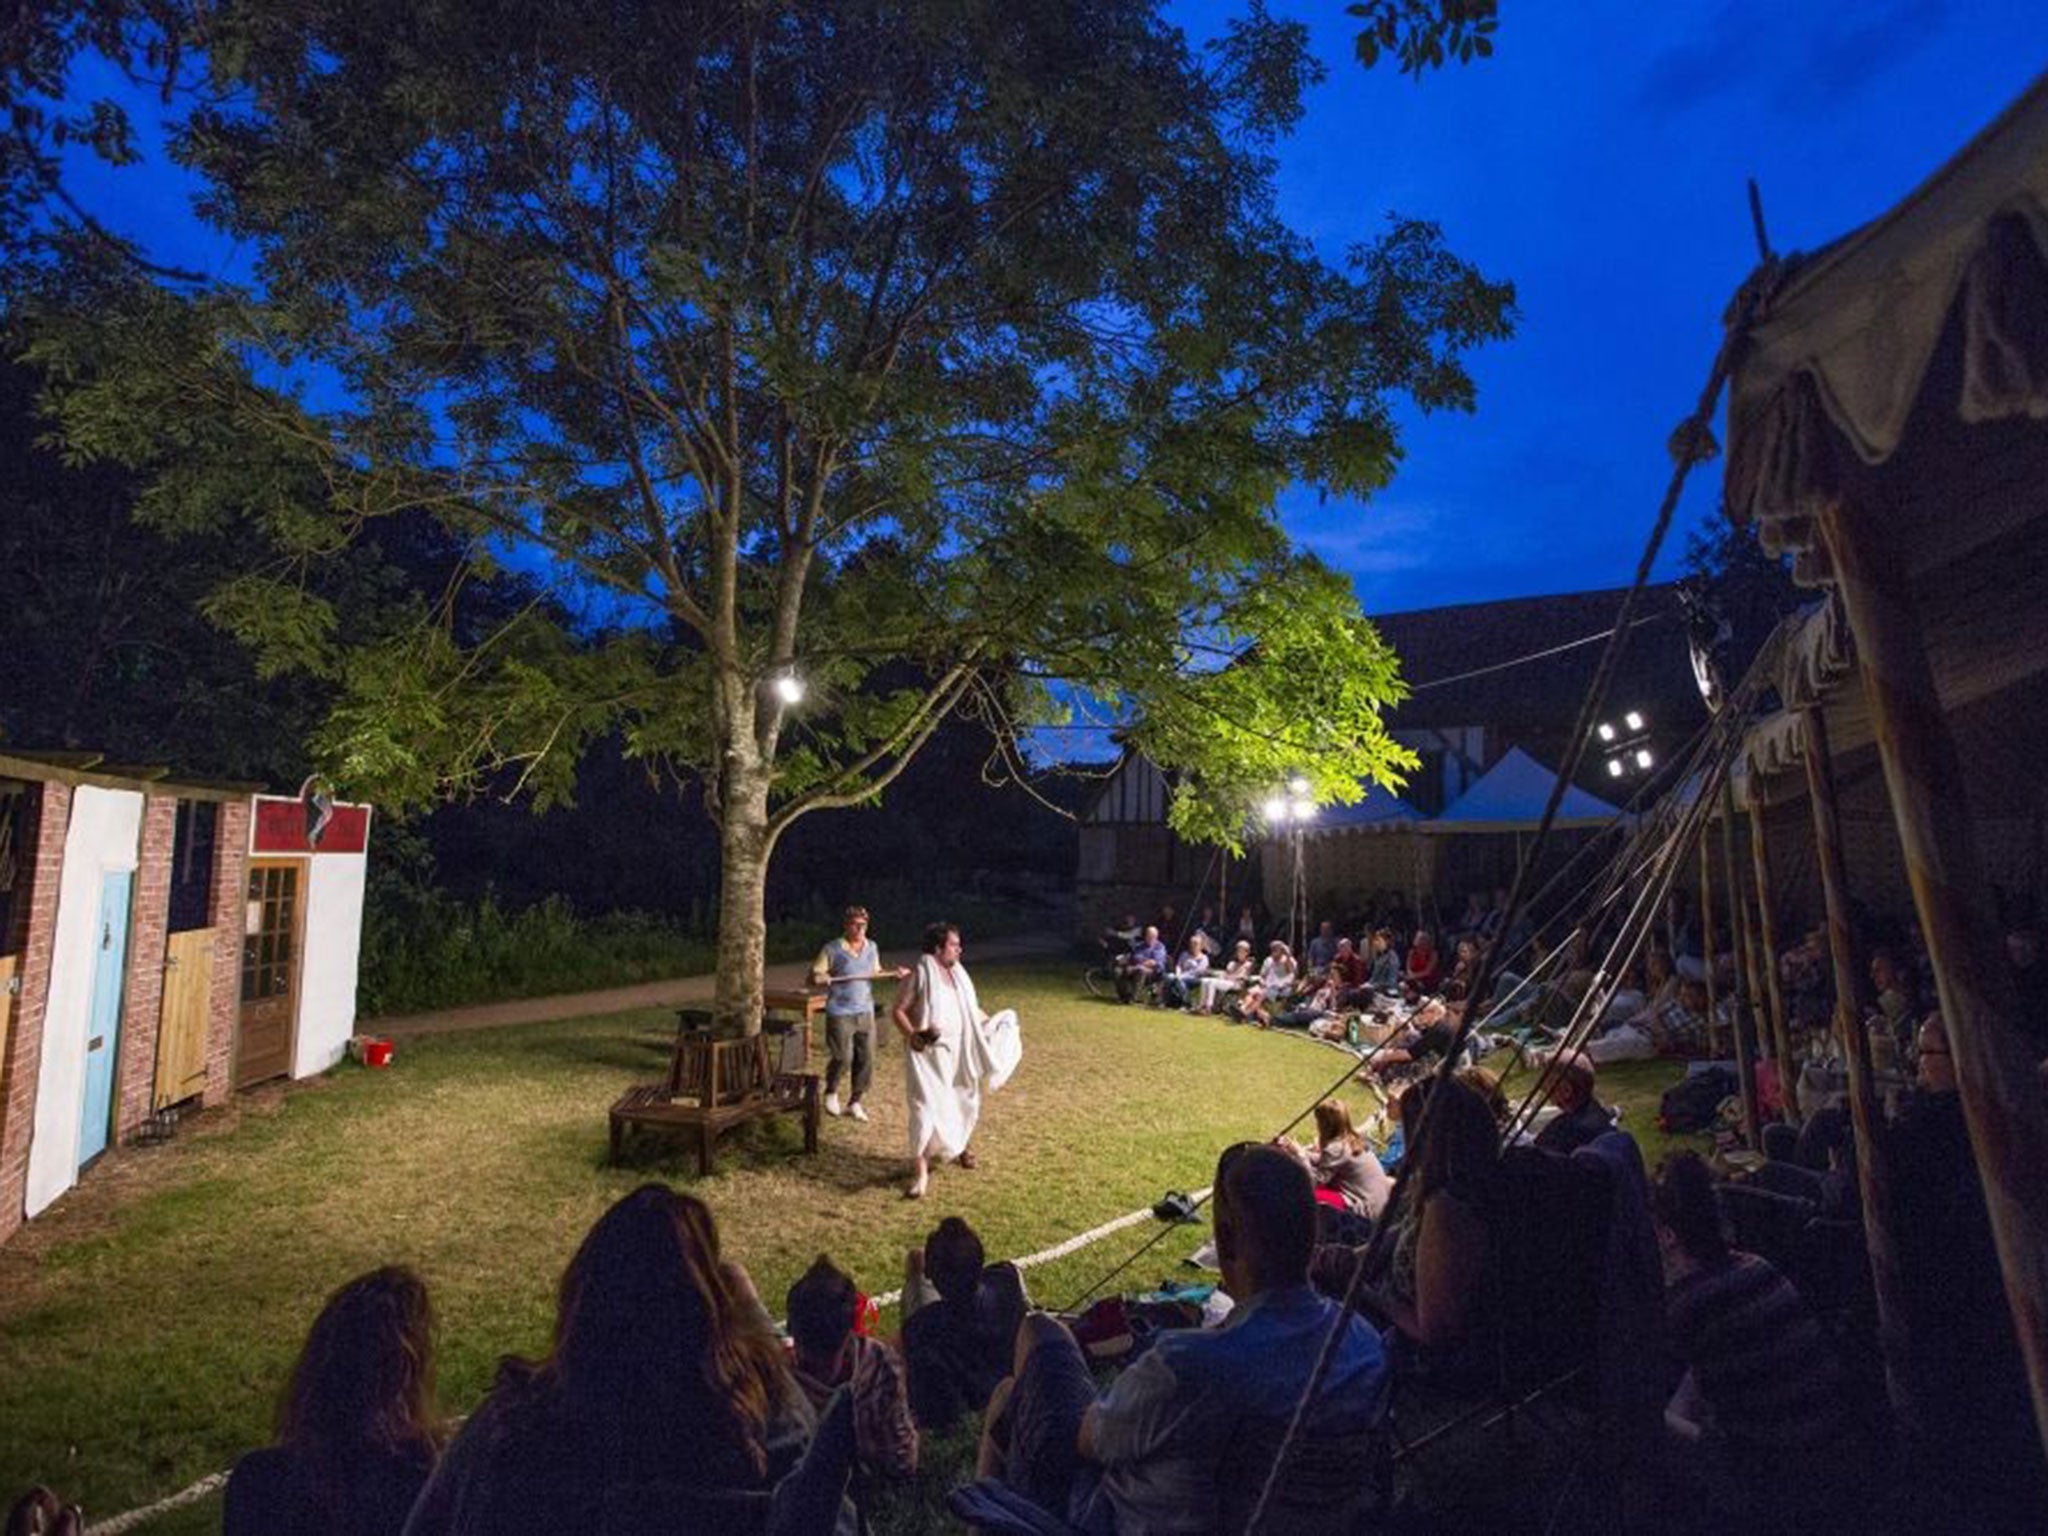 Into the woods: The Merry Wives of Windsor at Petersfield